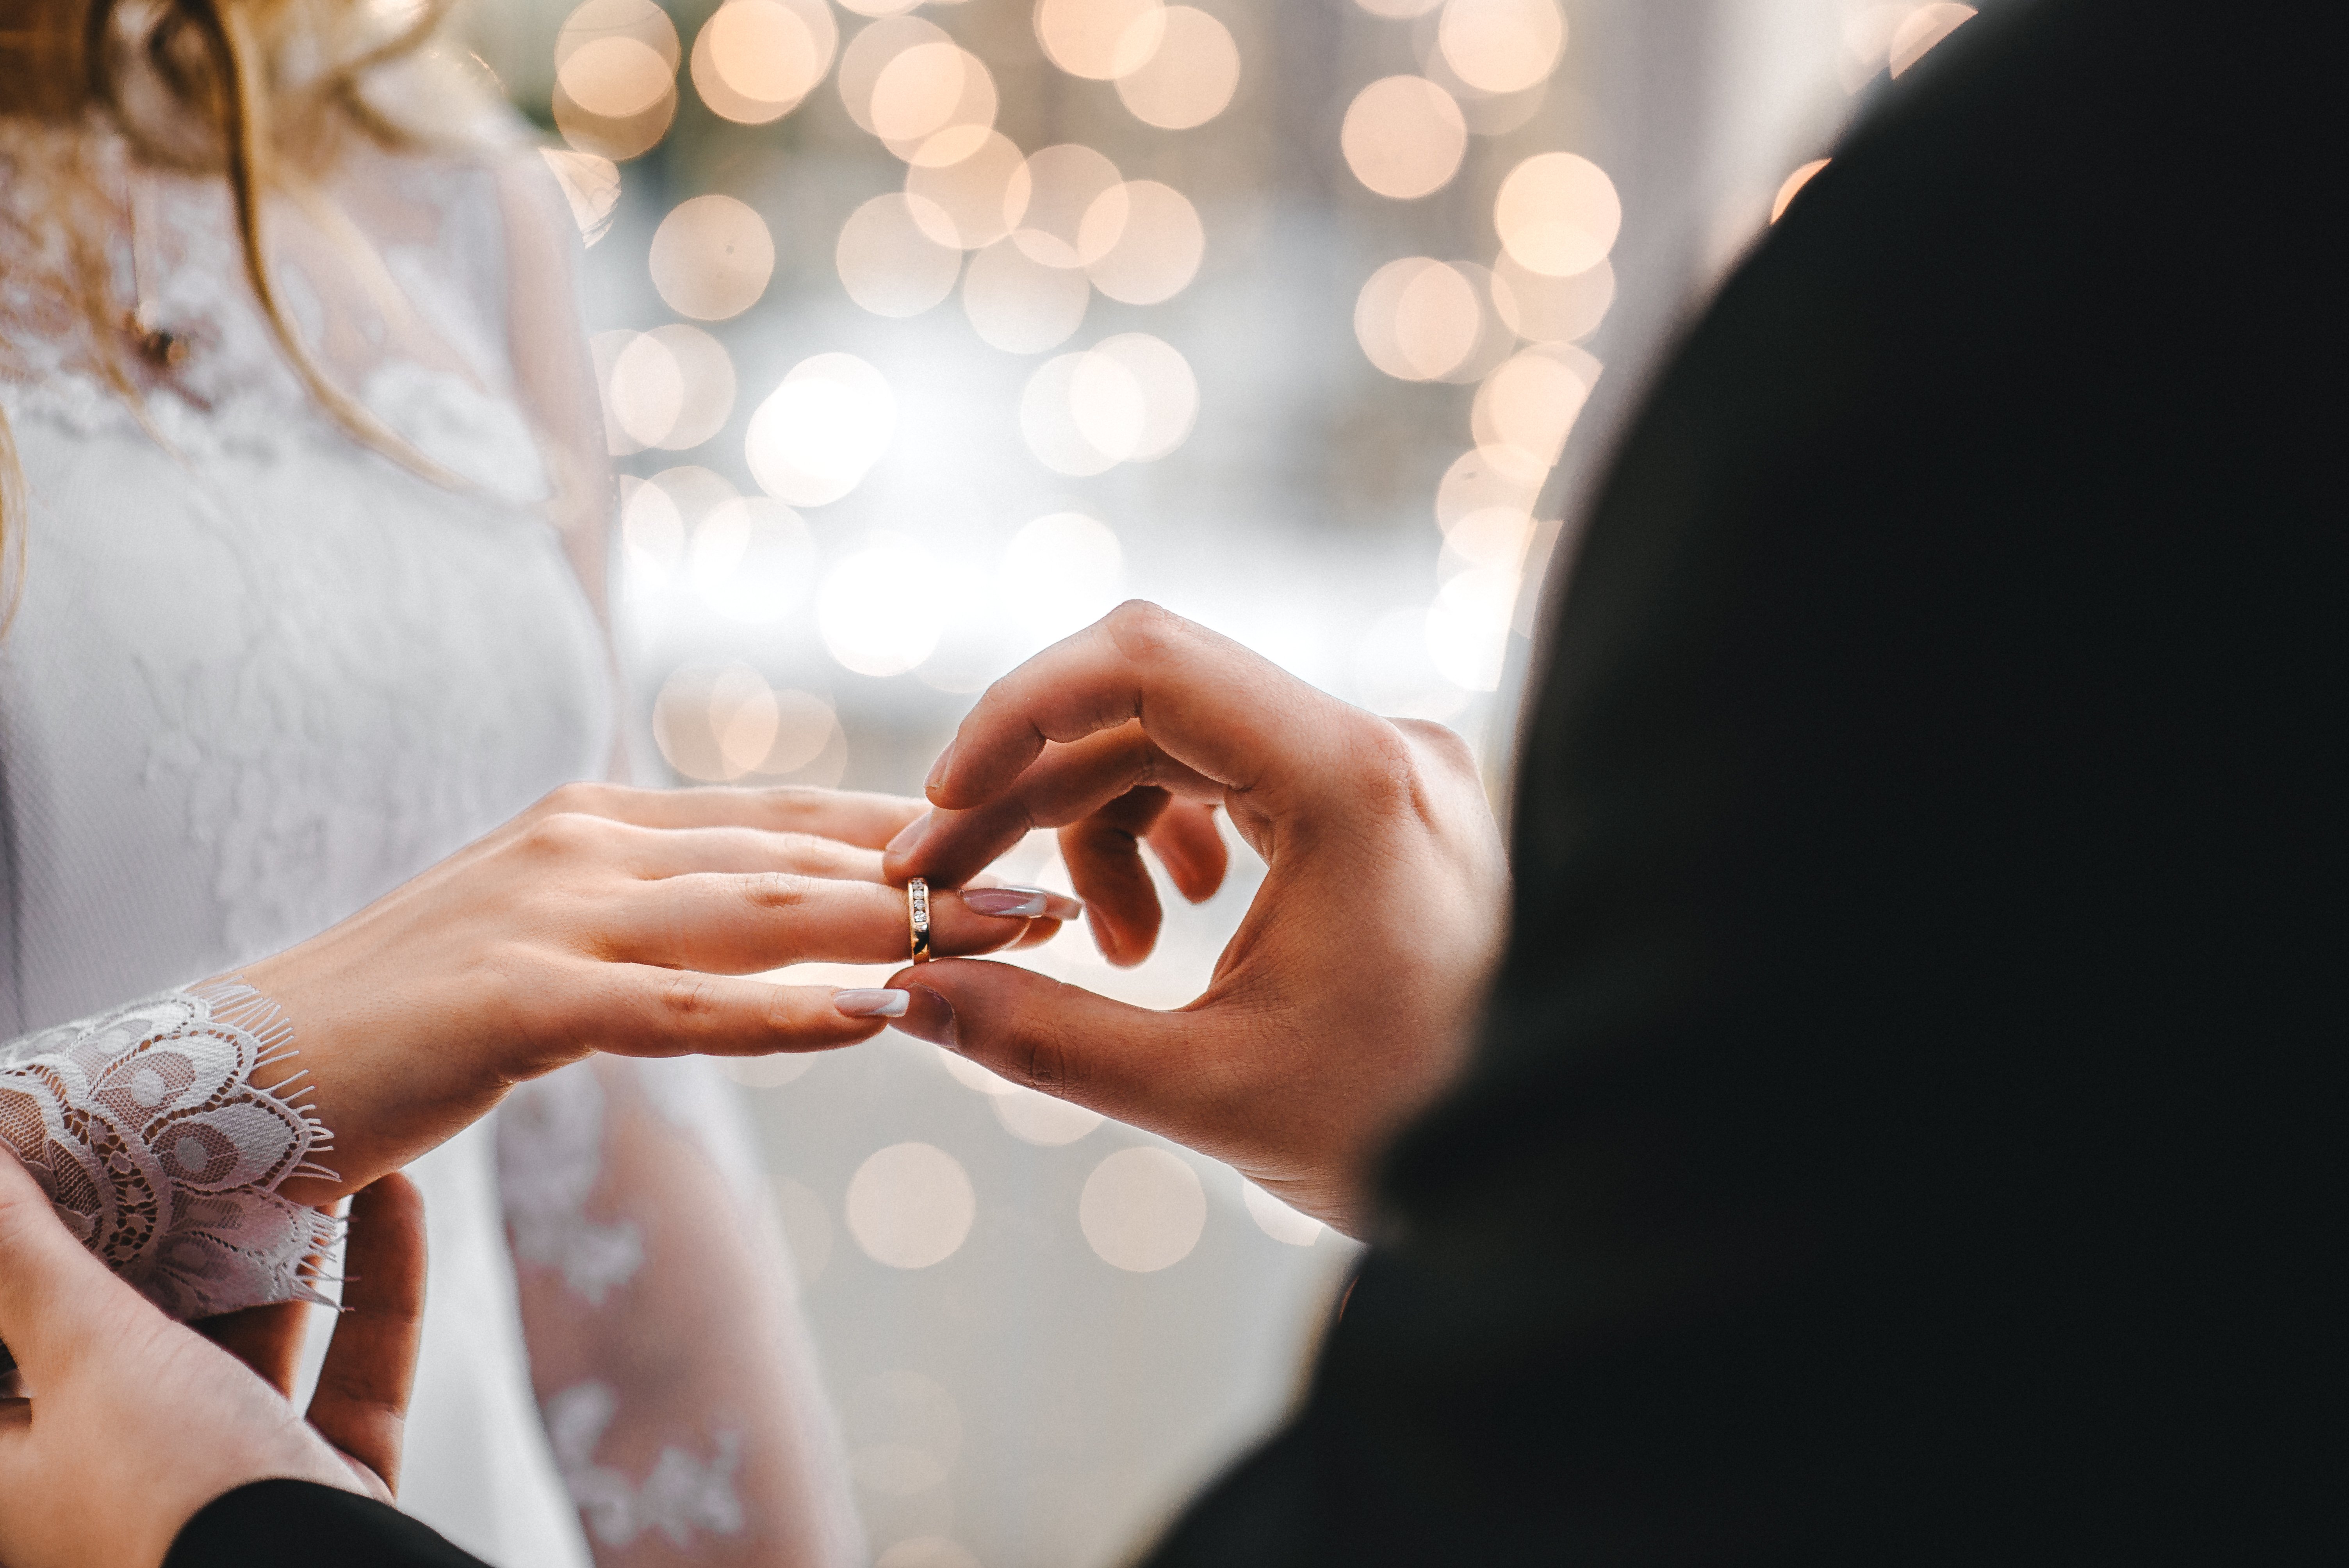 The groom placing the wedding ring on his bride. | Source: Shutterstock